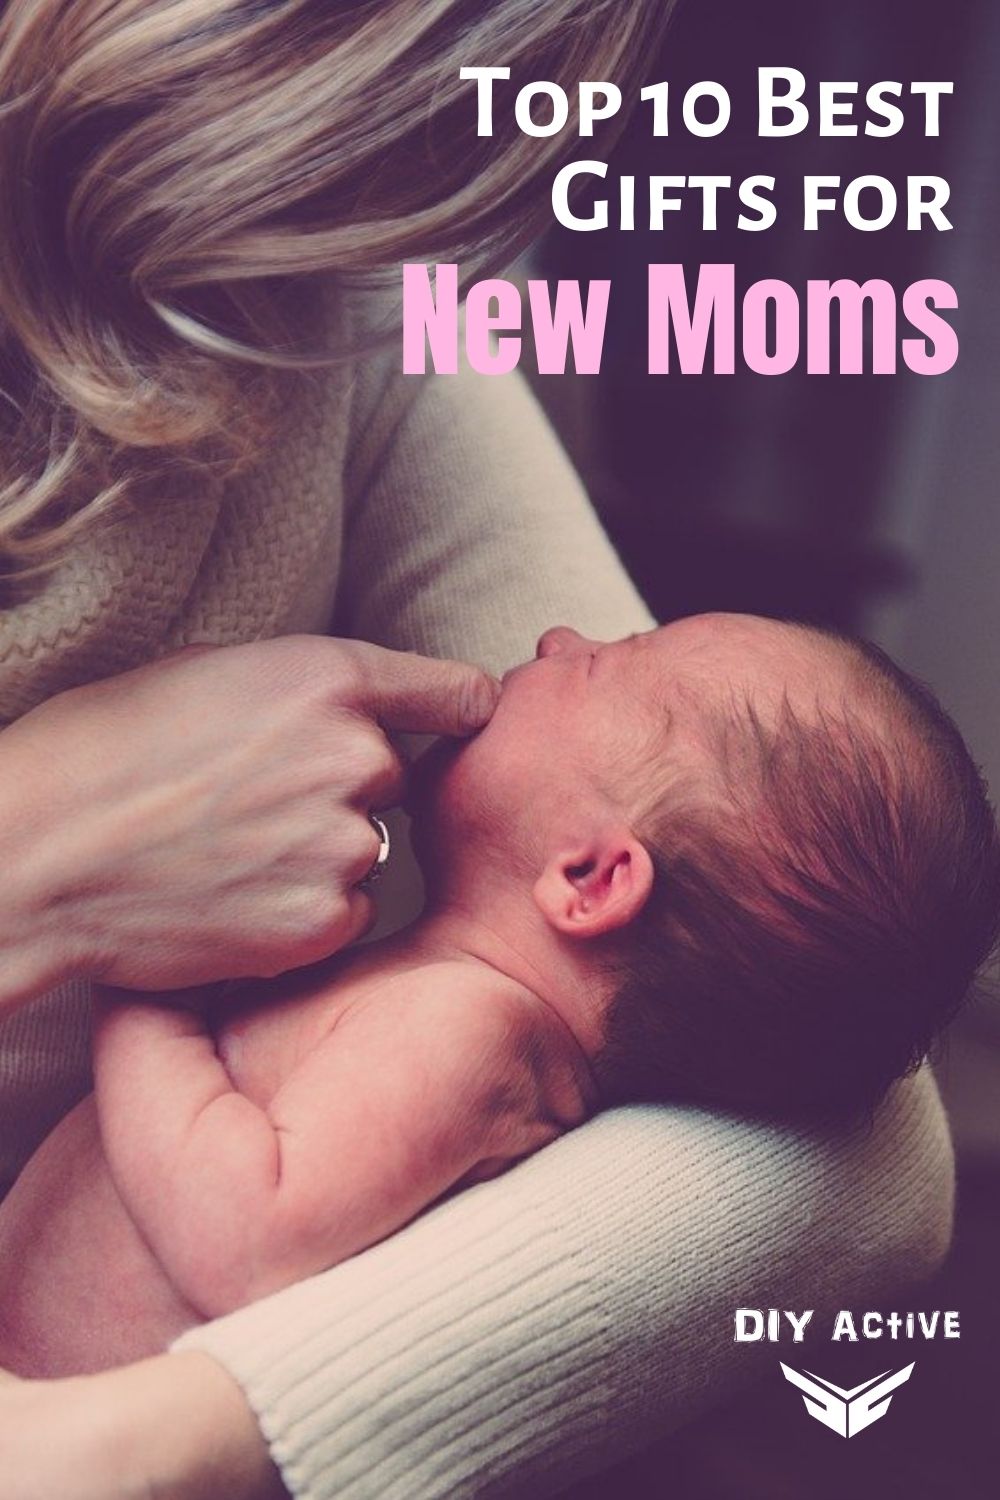 Top 10 Best Gifts for New Moms